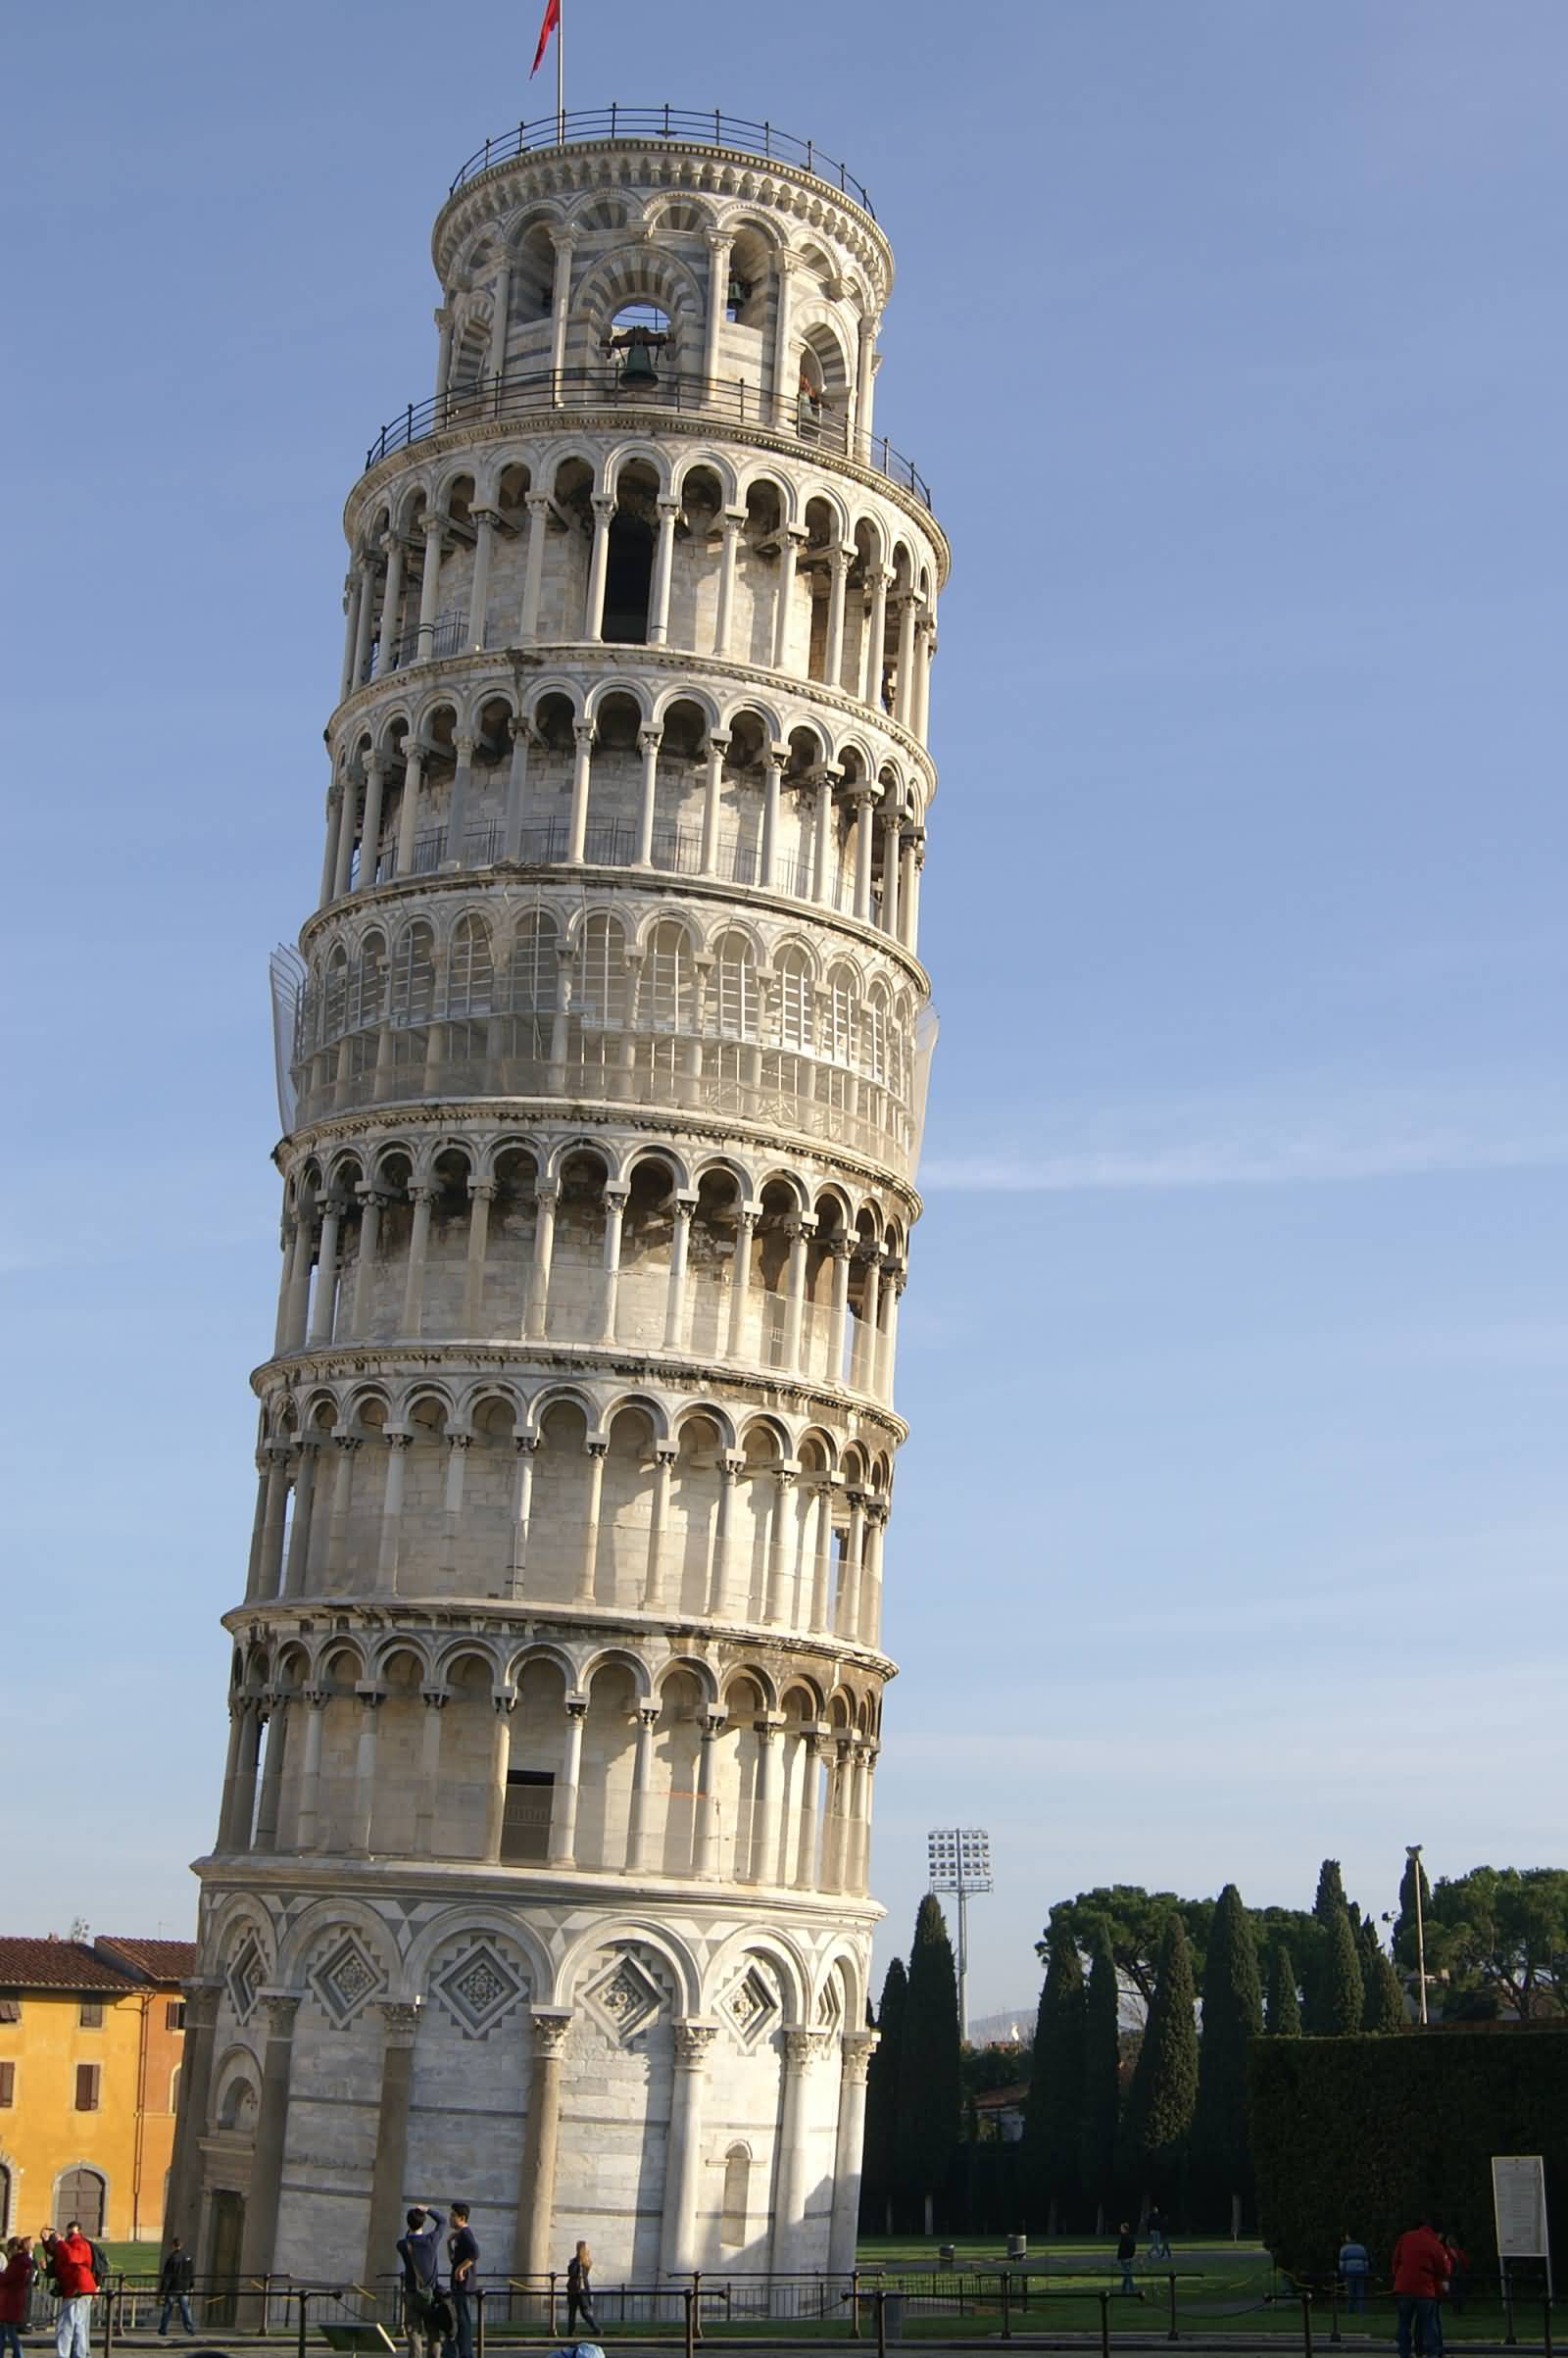 The Leaning Tower of Pisa Beautiful View Image